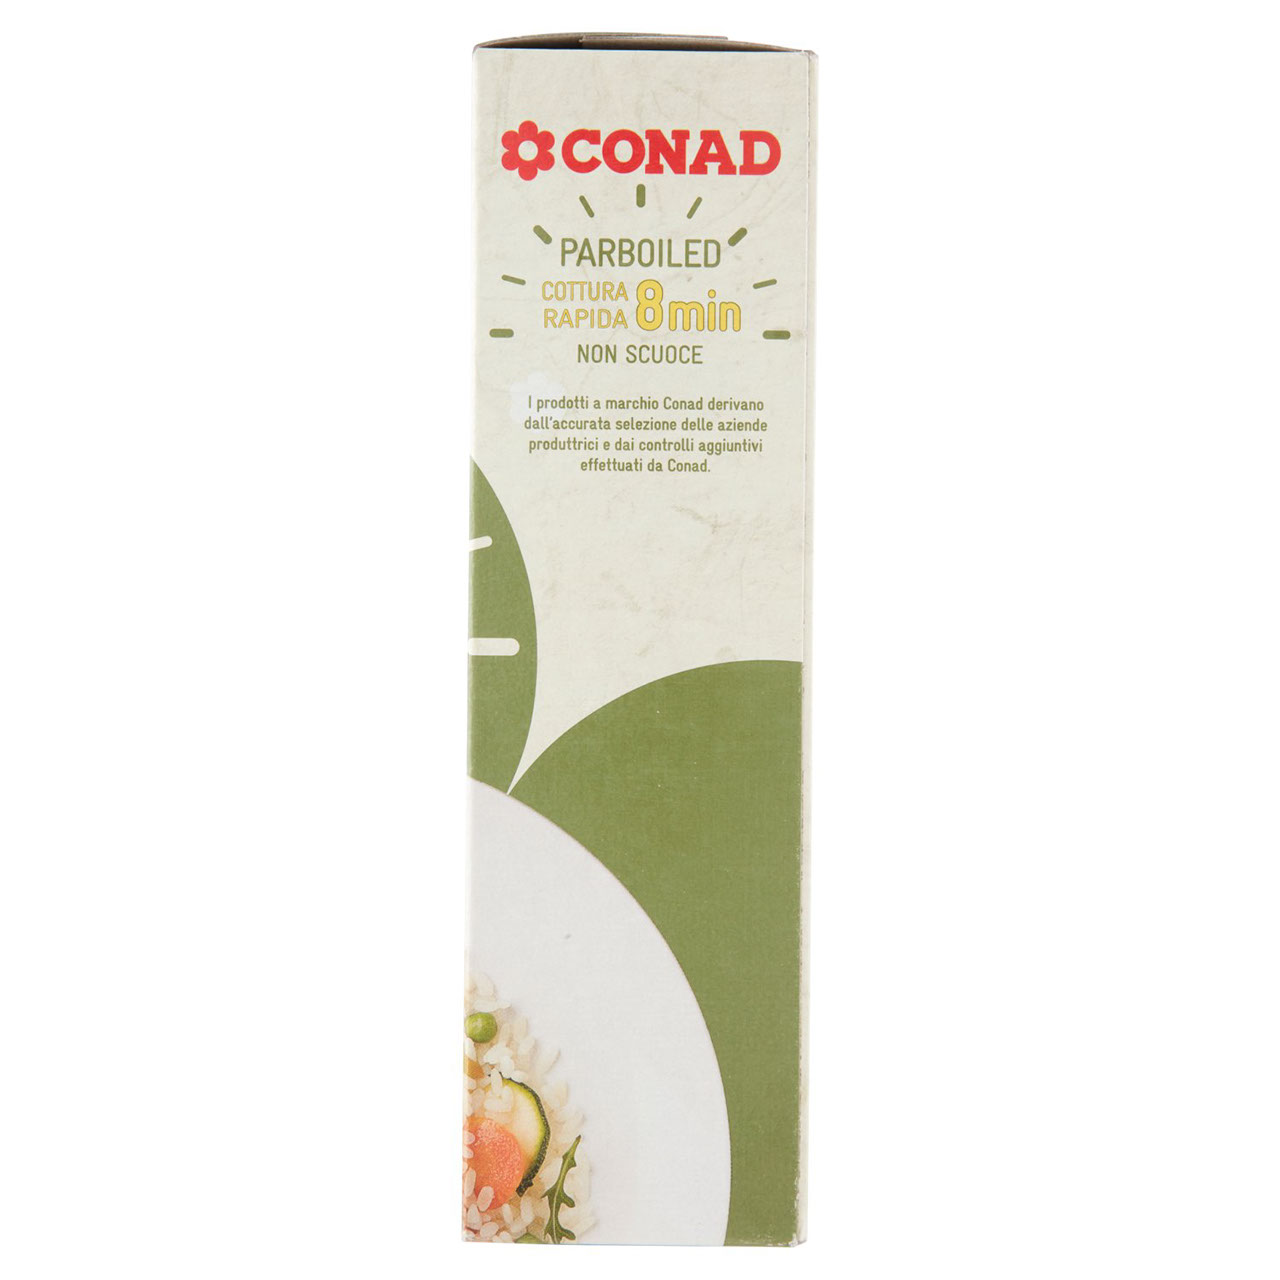 Riso Parboiled Cottura 8 min 1 kg Conad online